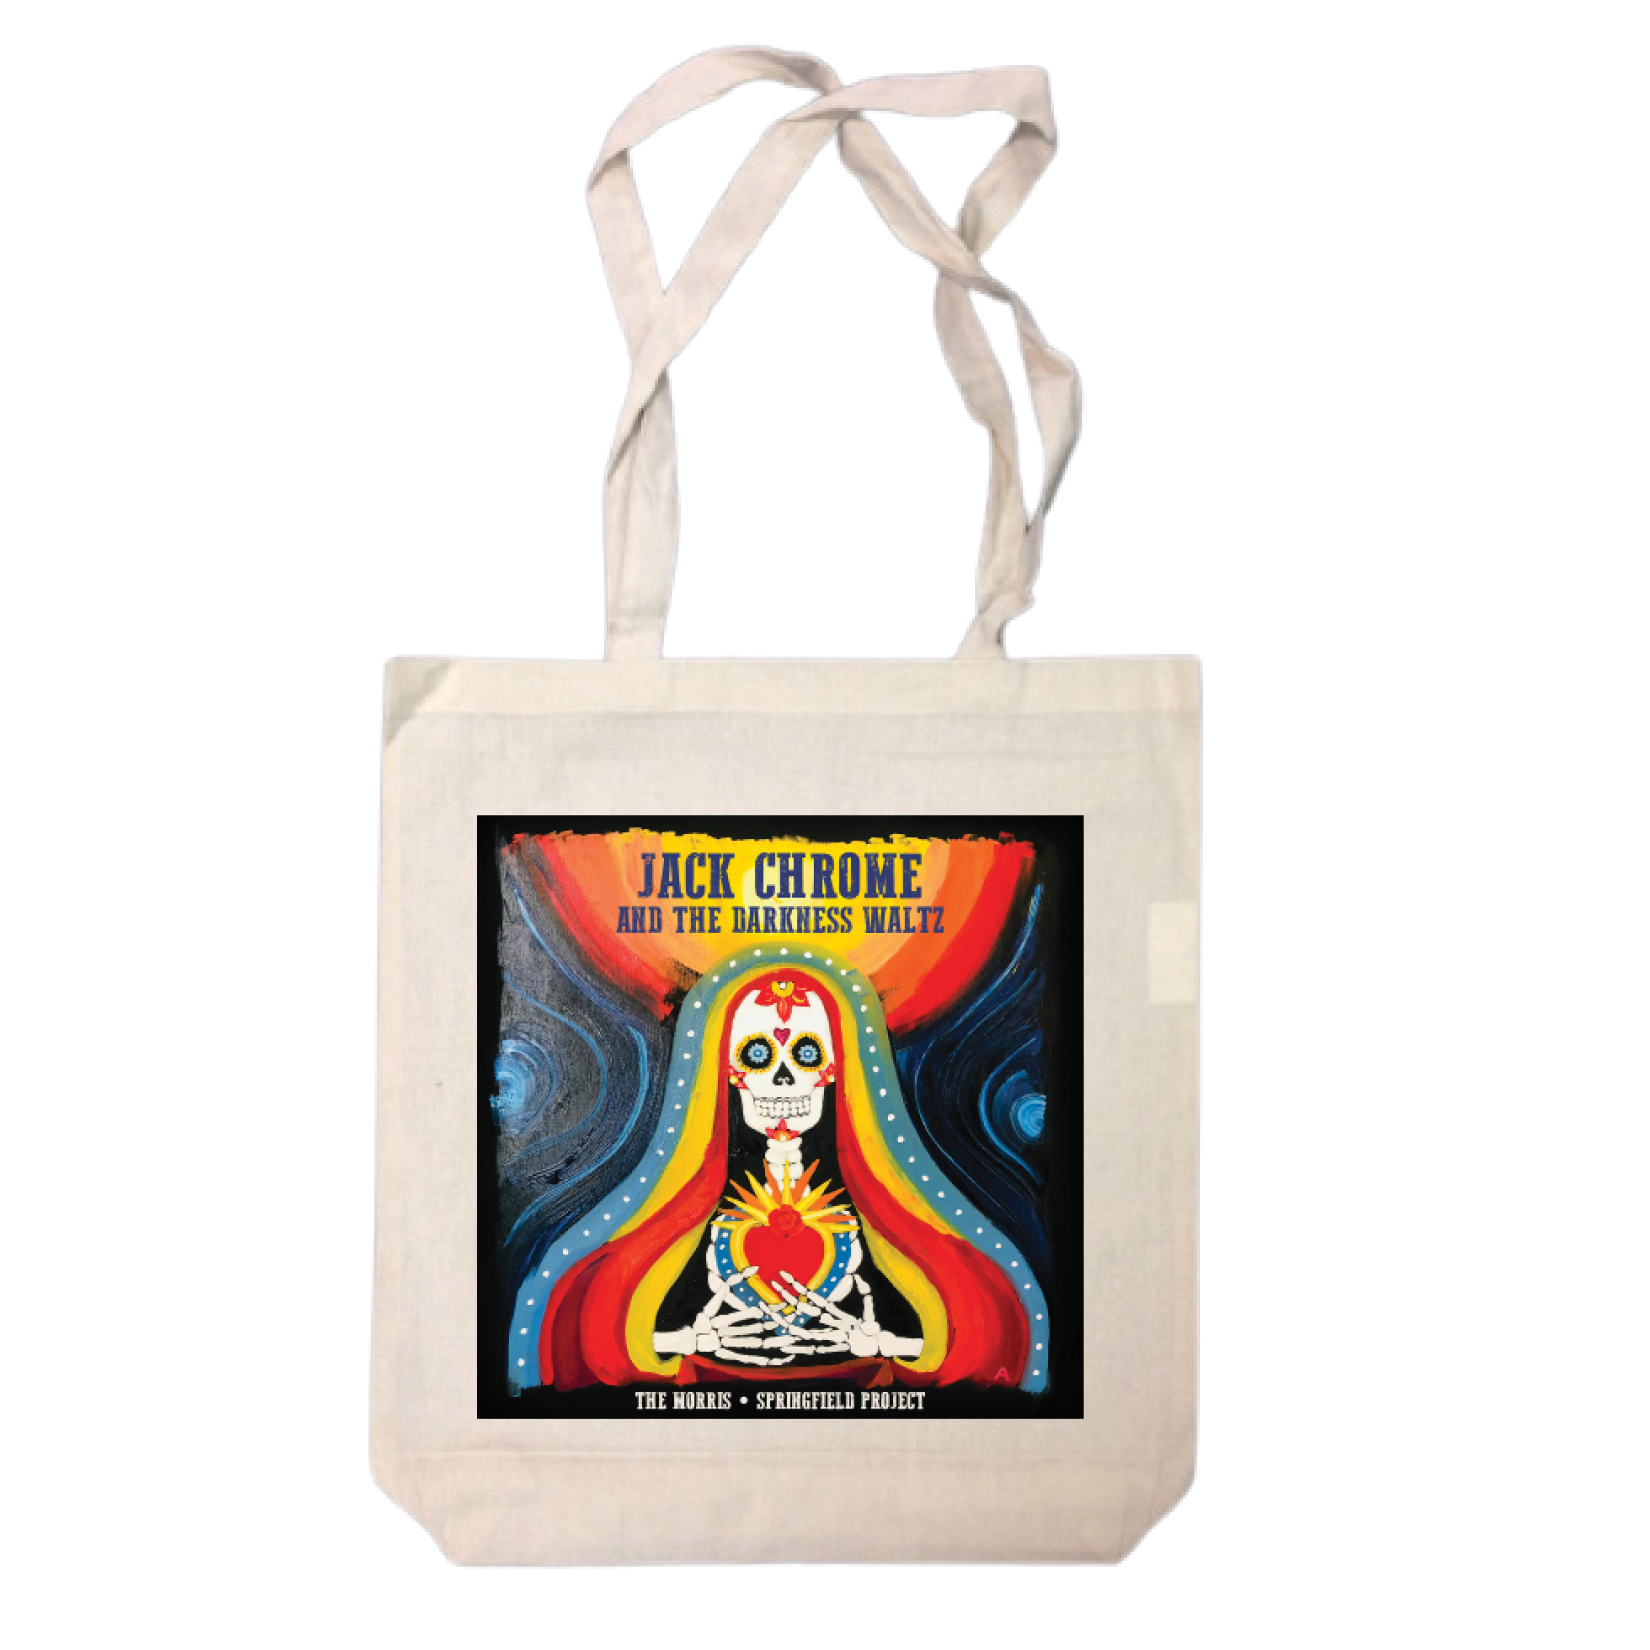 JACK CHROME AND THE DARKNESS WALTZ Tote Bag